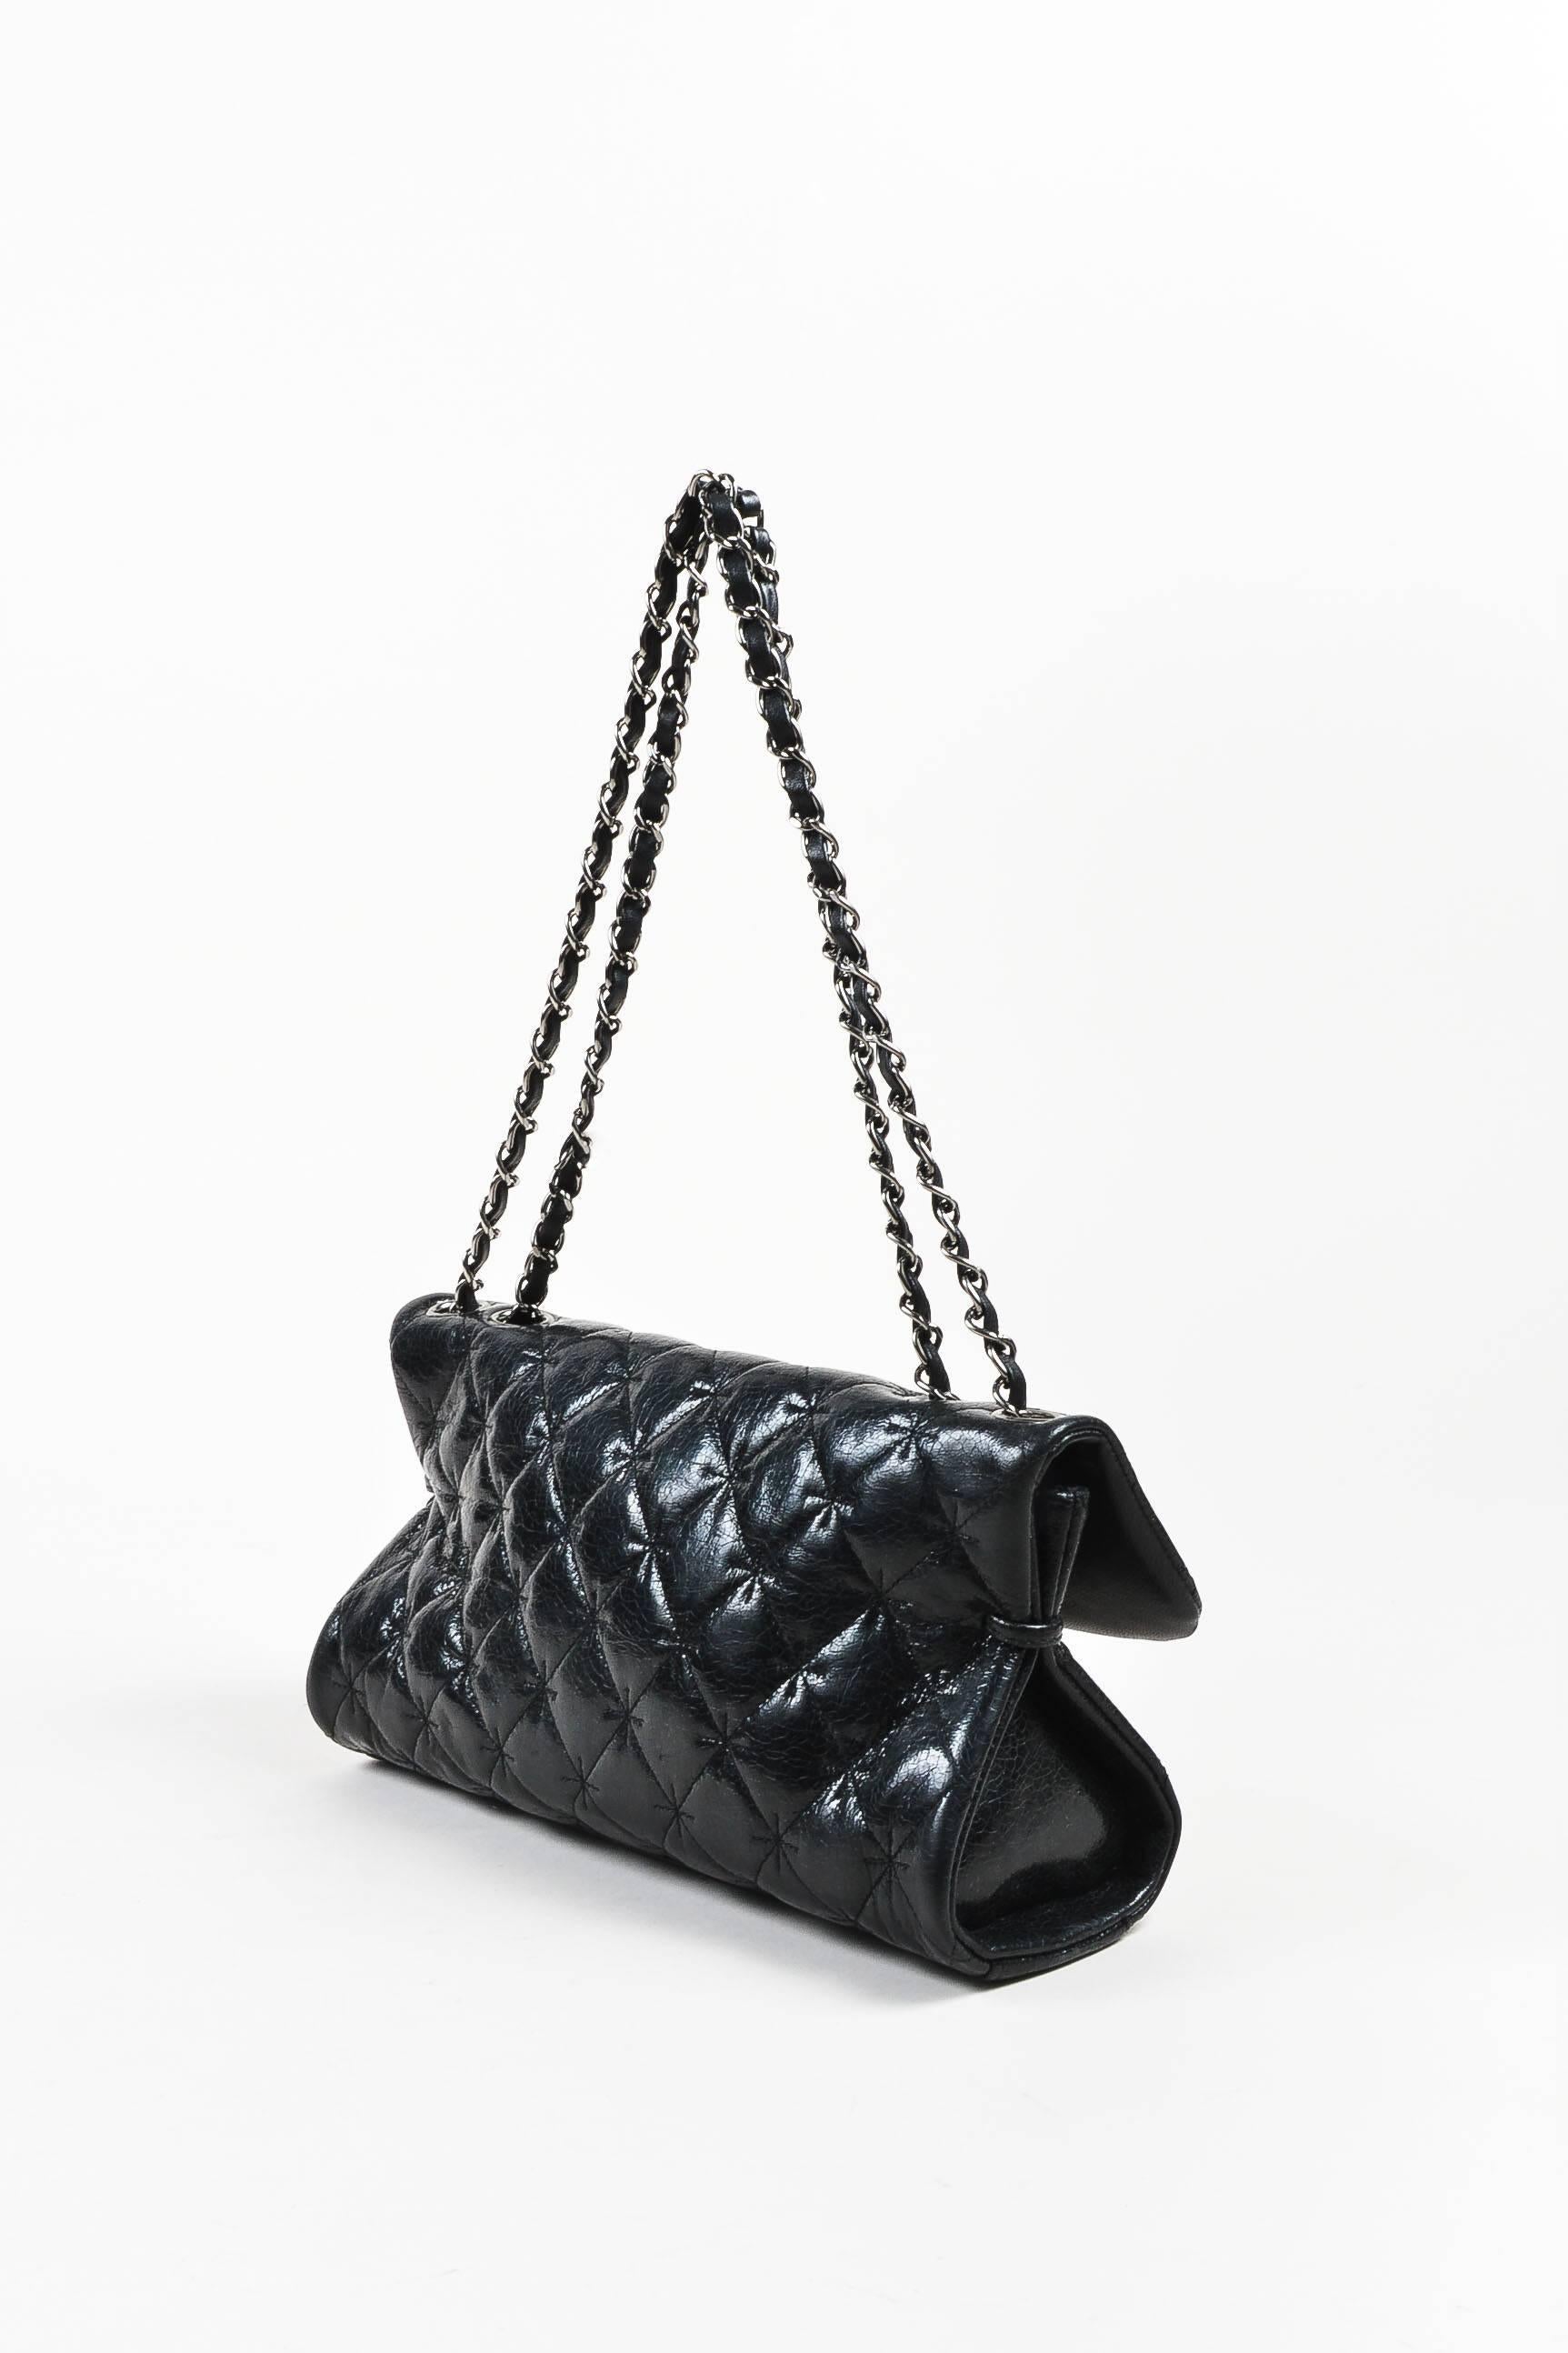 Circa 2005-2006 Chanel east-west shoulder bag in glazed black crackled leather. Crosshatch stitching detailing on classic diamond-quilting. Silver-tone metal accents and hardware. Doubled curb-chain shoulder straps with leather interlaced